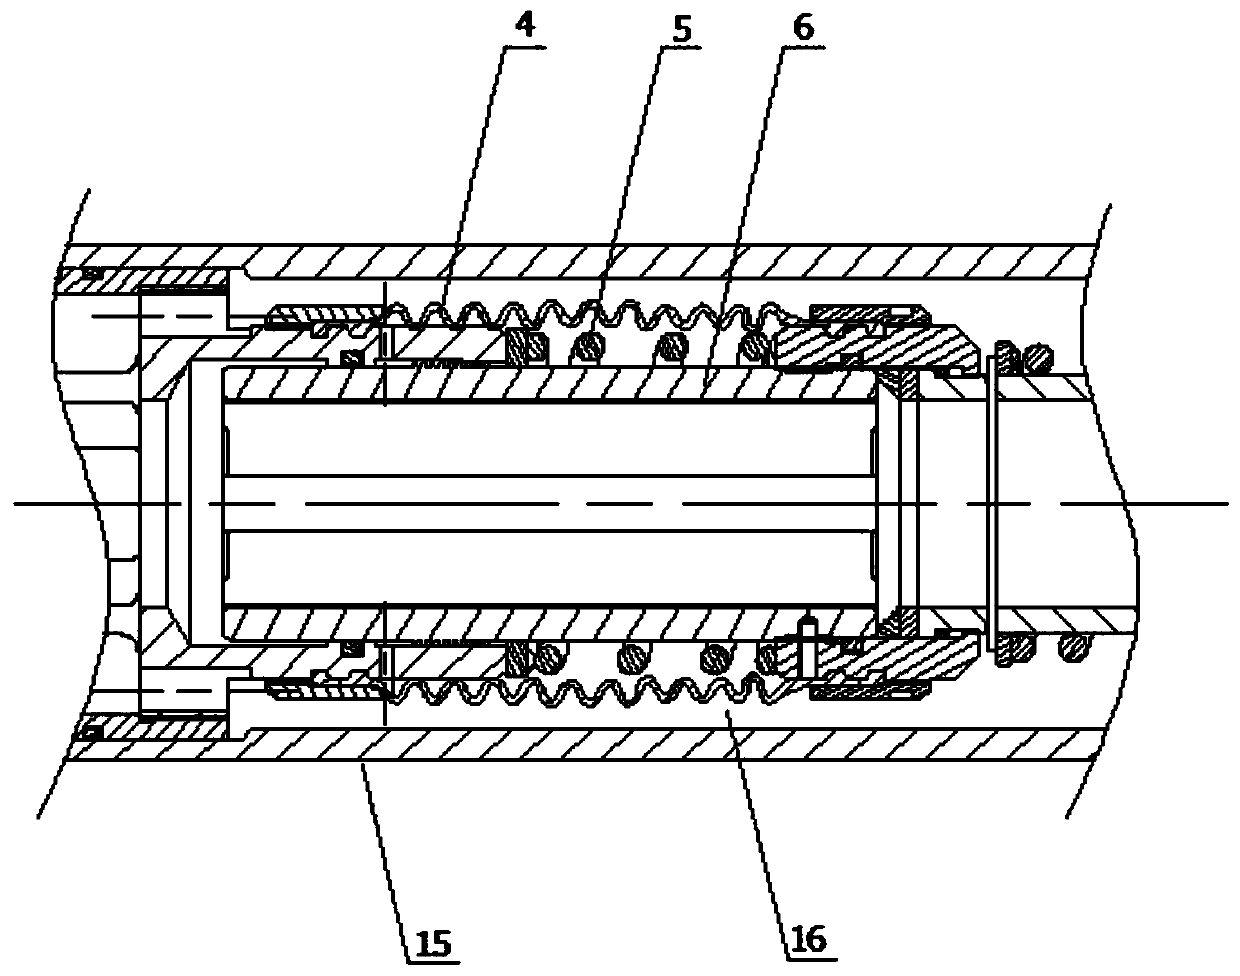 A large-displacement single-pipe layered polymer injection adjustable device